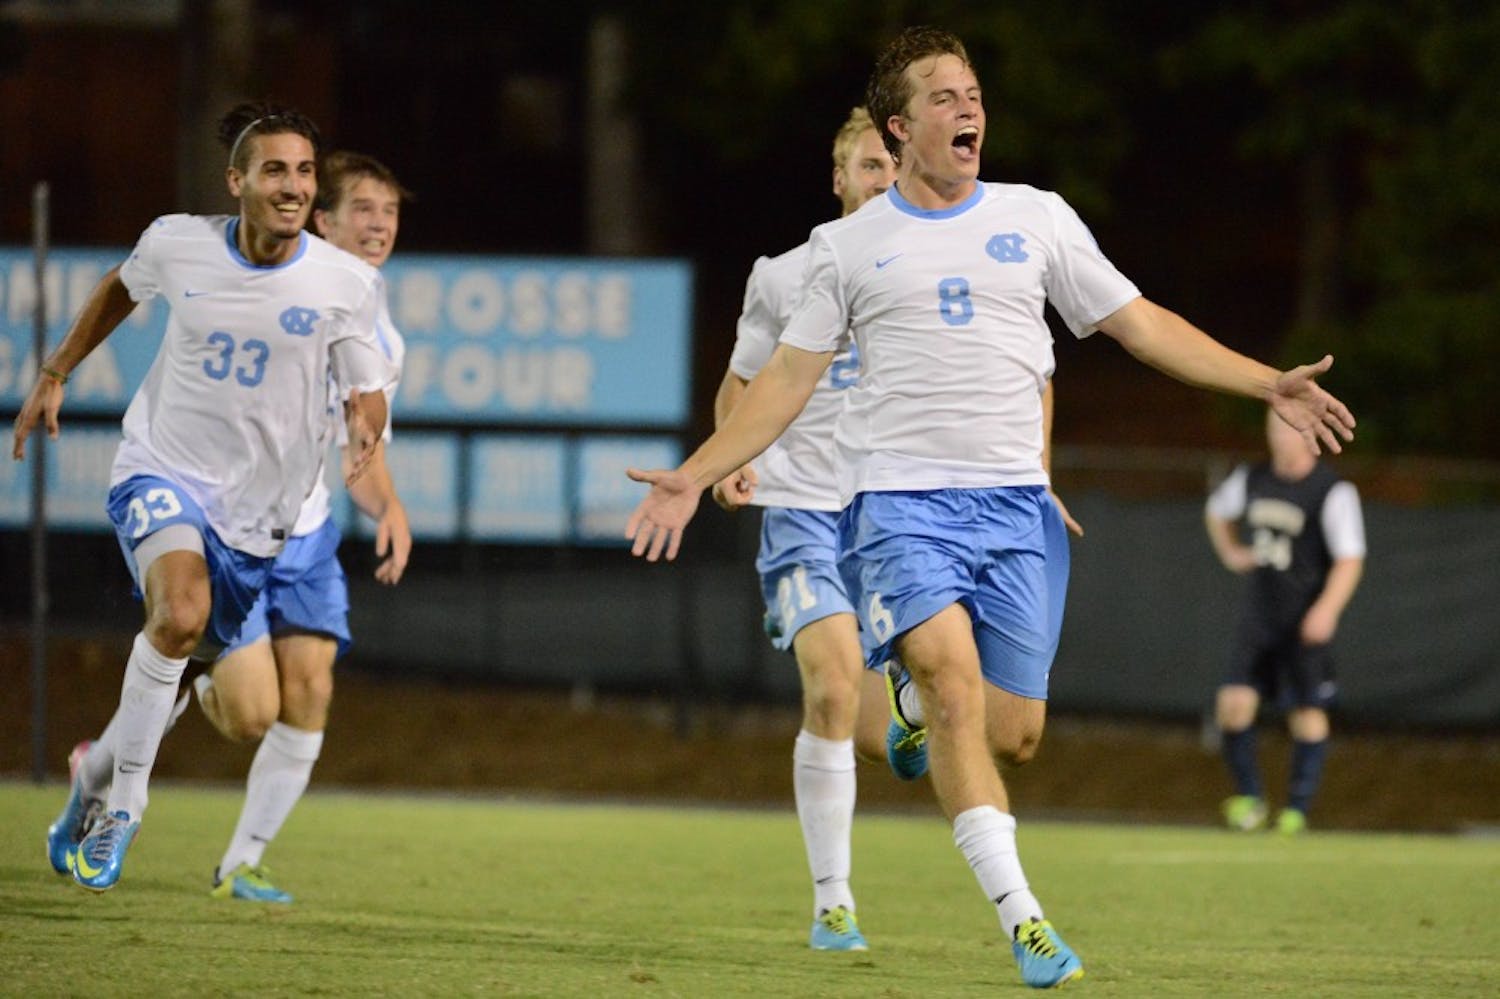 UNC forward Tyler Engel (8) celebrates after scoring the game winning goal in the second overtime period.